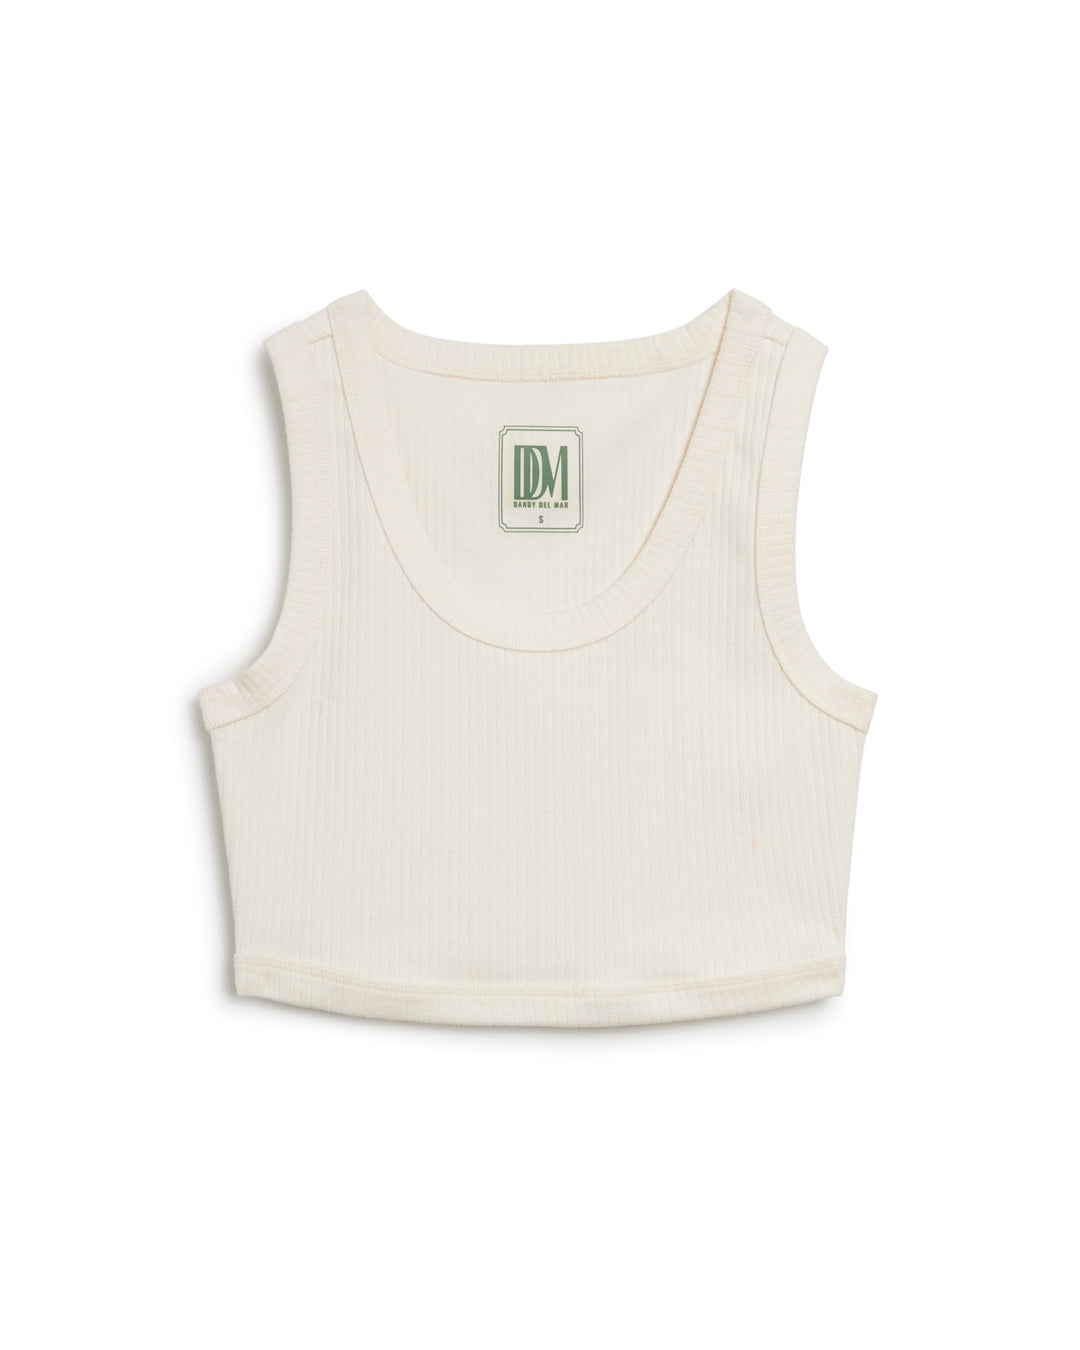 A white crop top with a green logo on it, the Dandy Del Mar Seine Rib Tank - Shell.